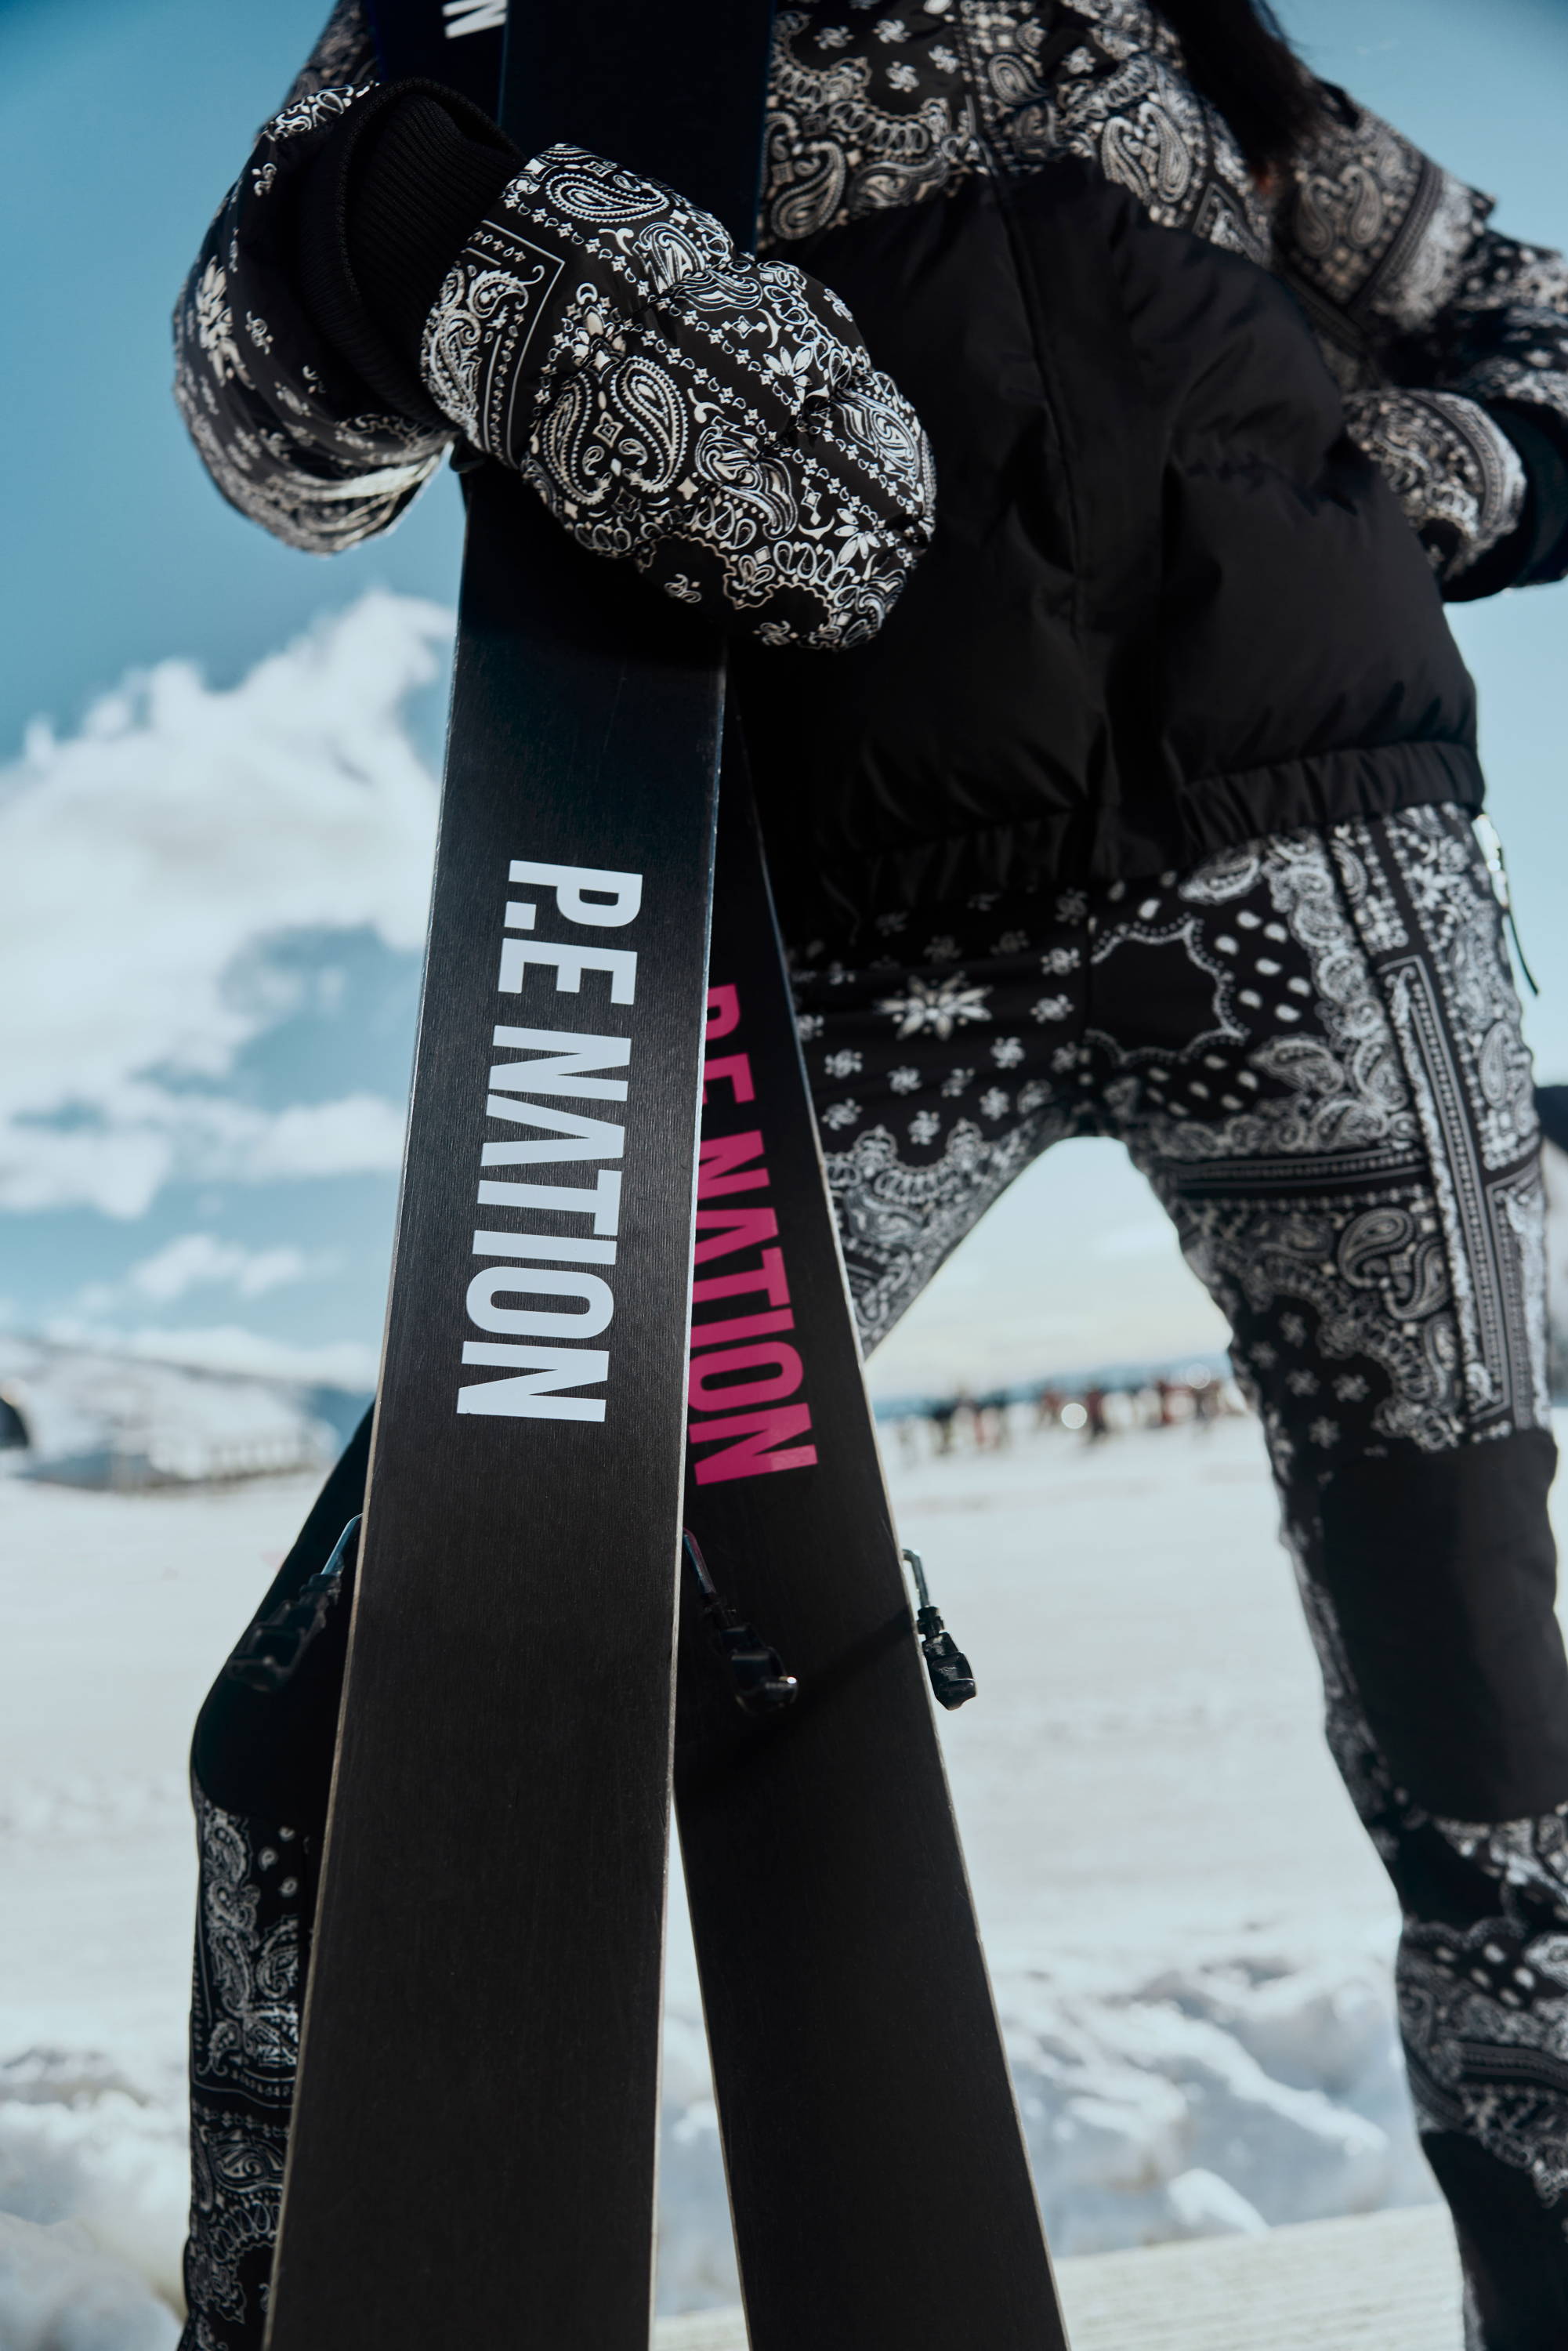 Discover sustainable ski apparel at P.E Nation 